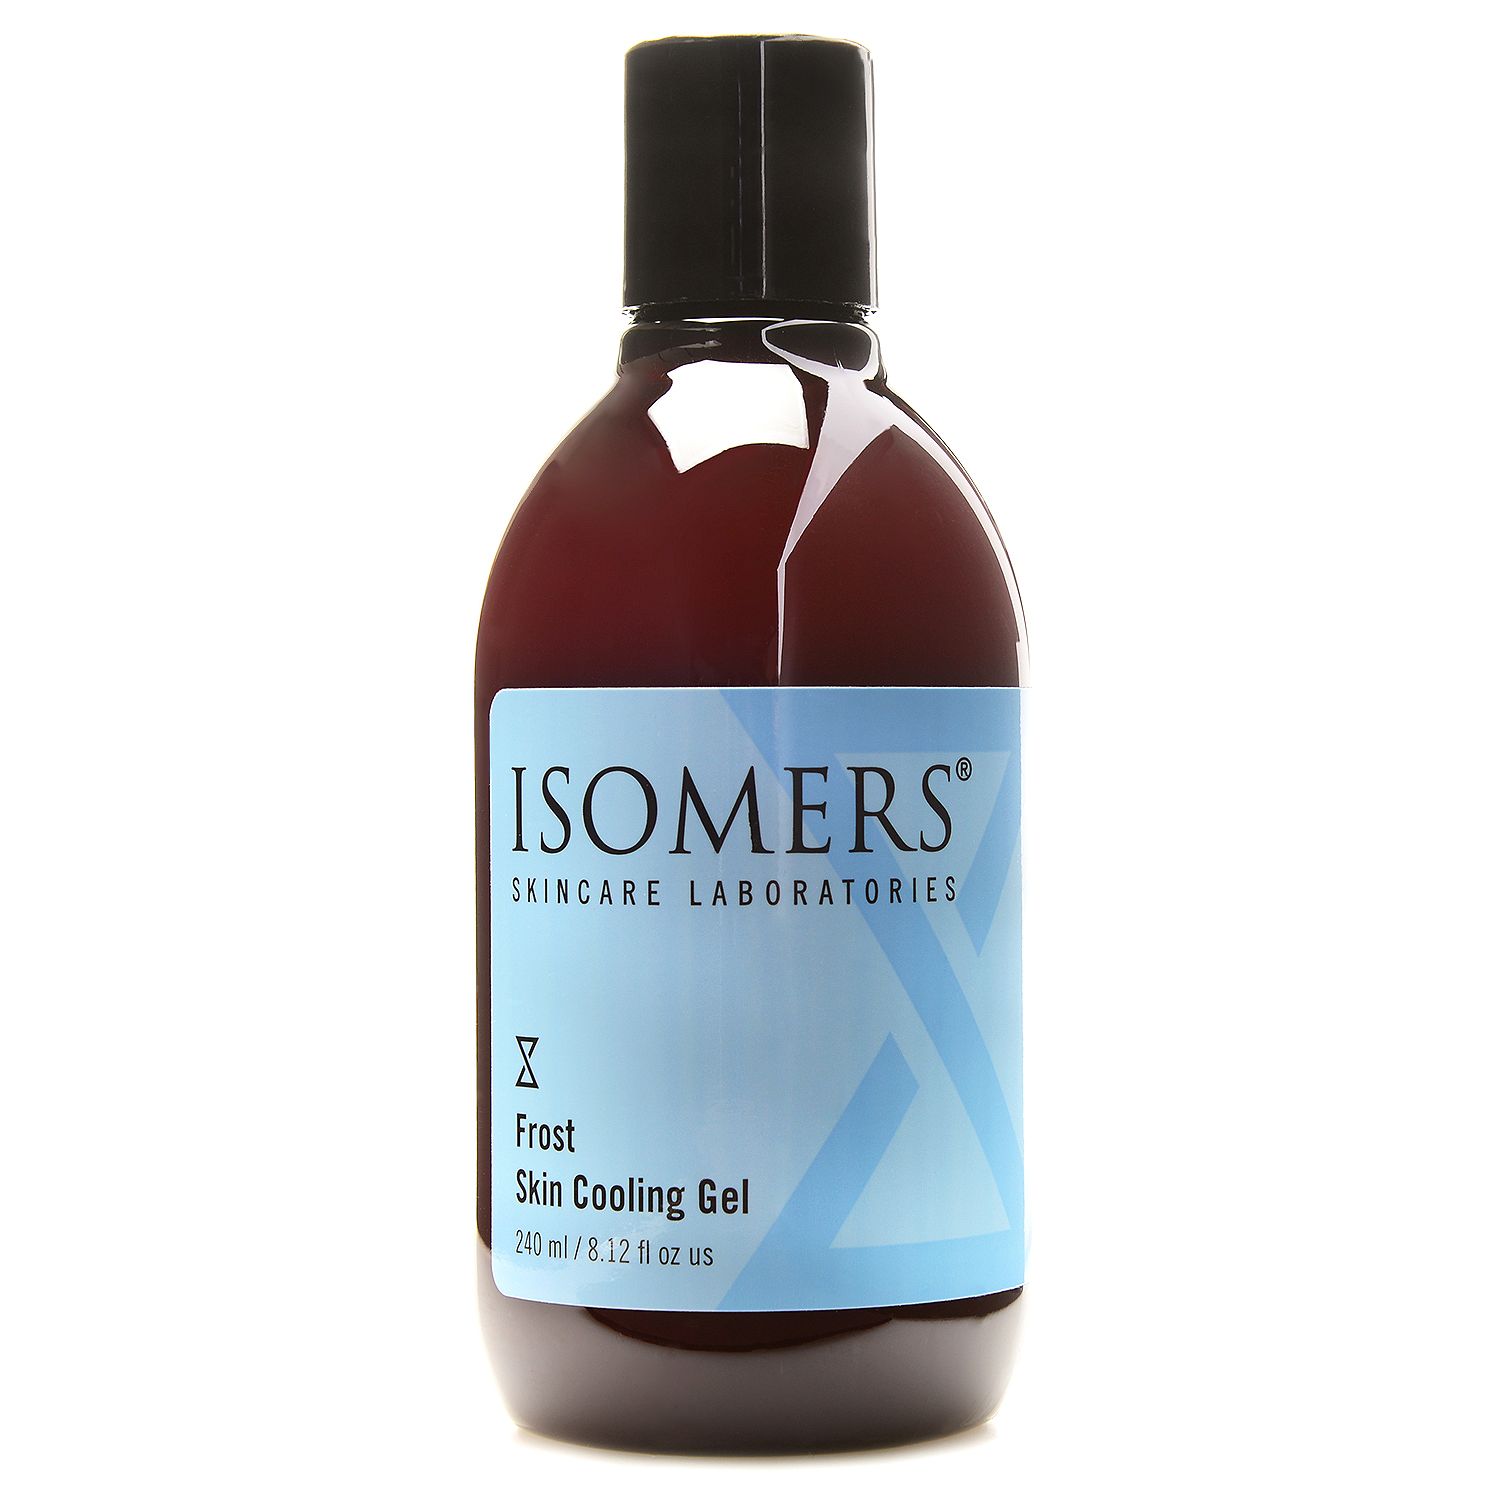 313-062- ISOMERS Skincare Frost Skin Cooling Gel 8.12 oz